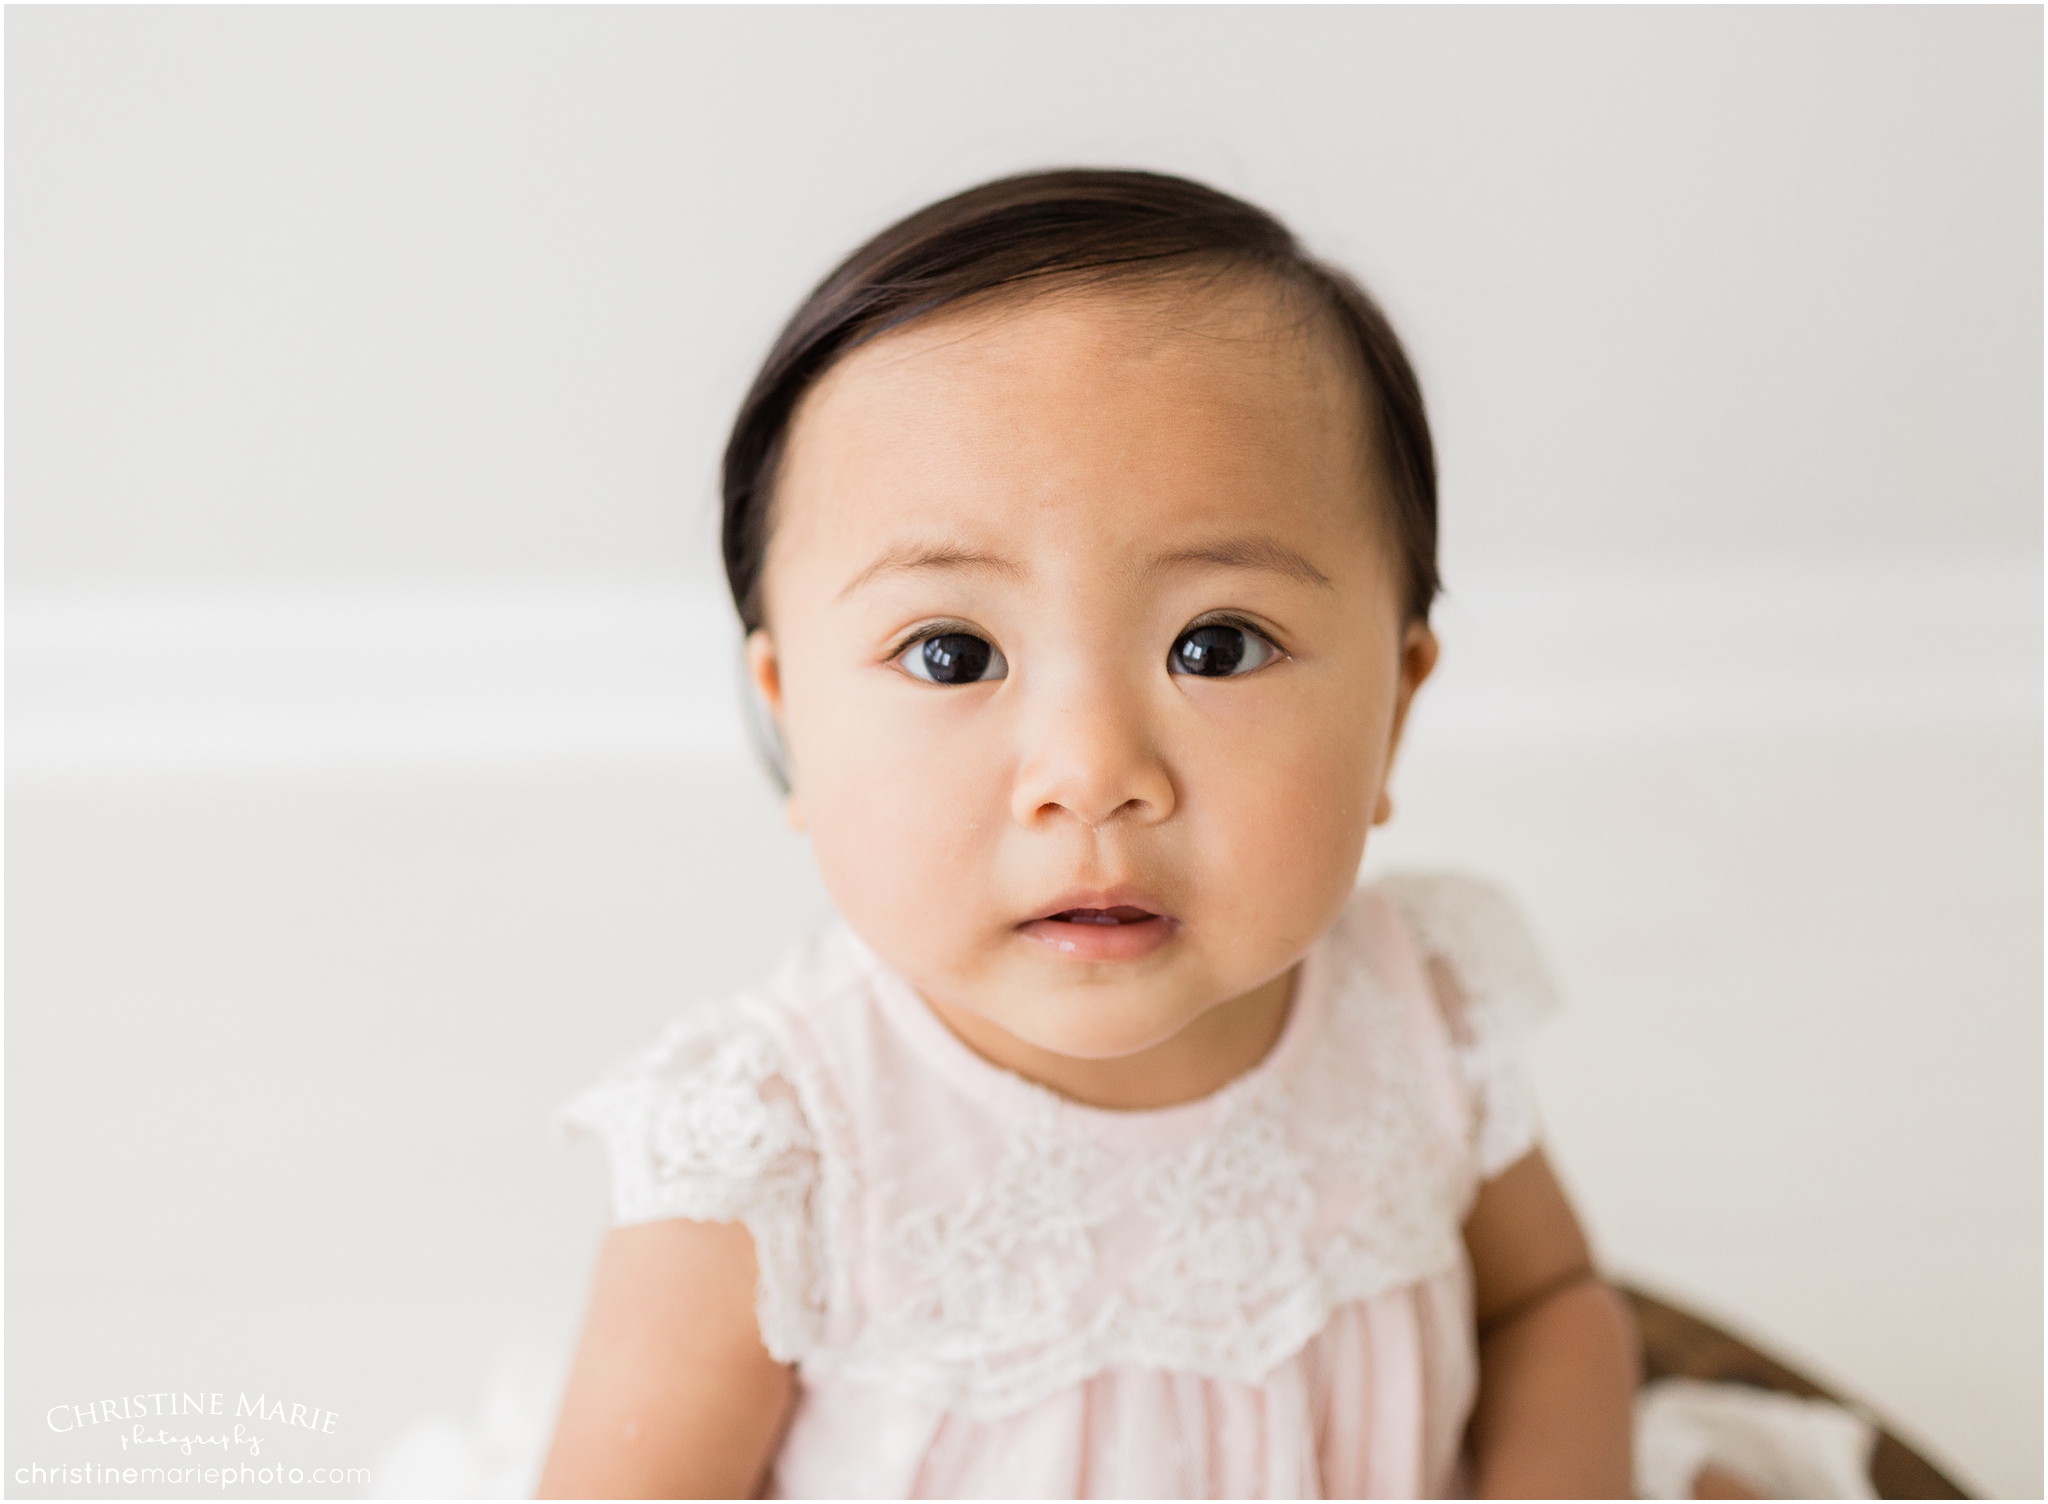 7 month photos of baby girl